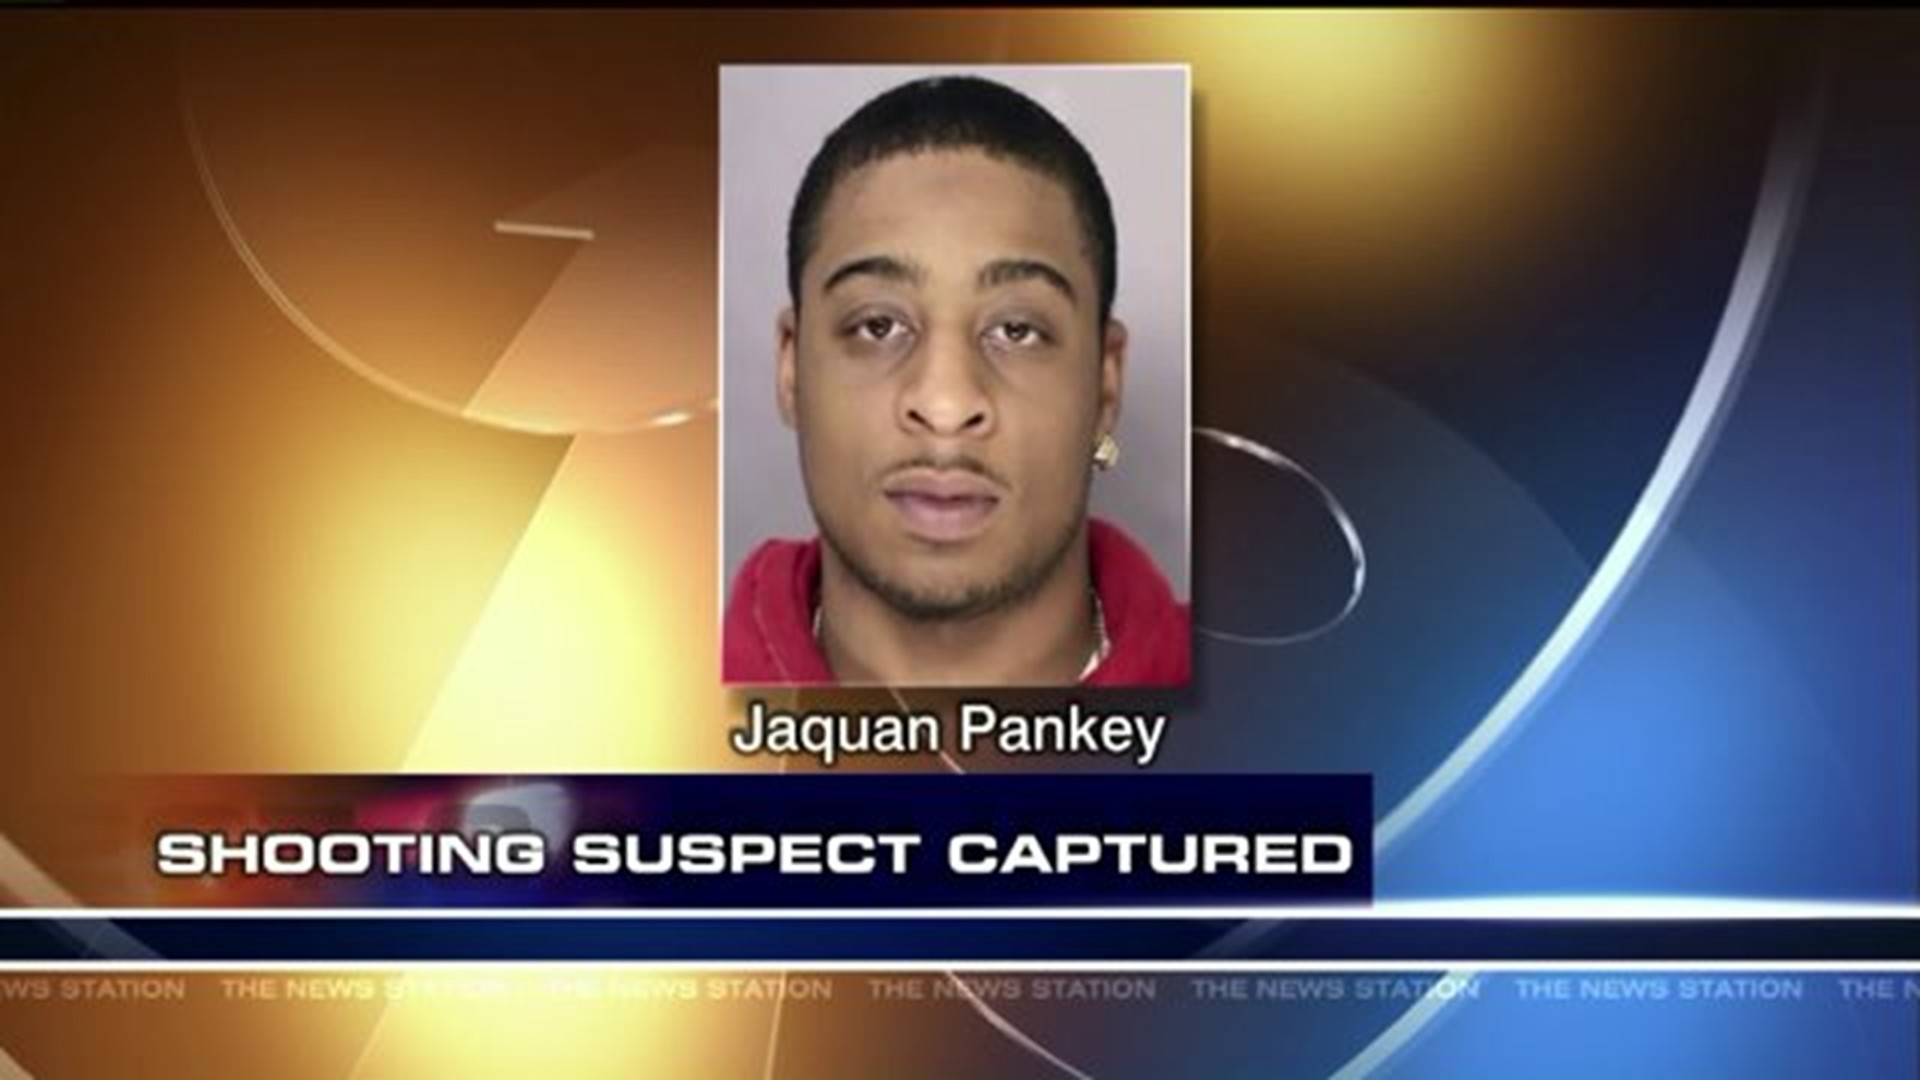 Fugitive Wanted for Scranton Shooting Found Hiding in Closet